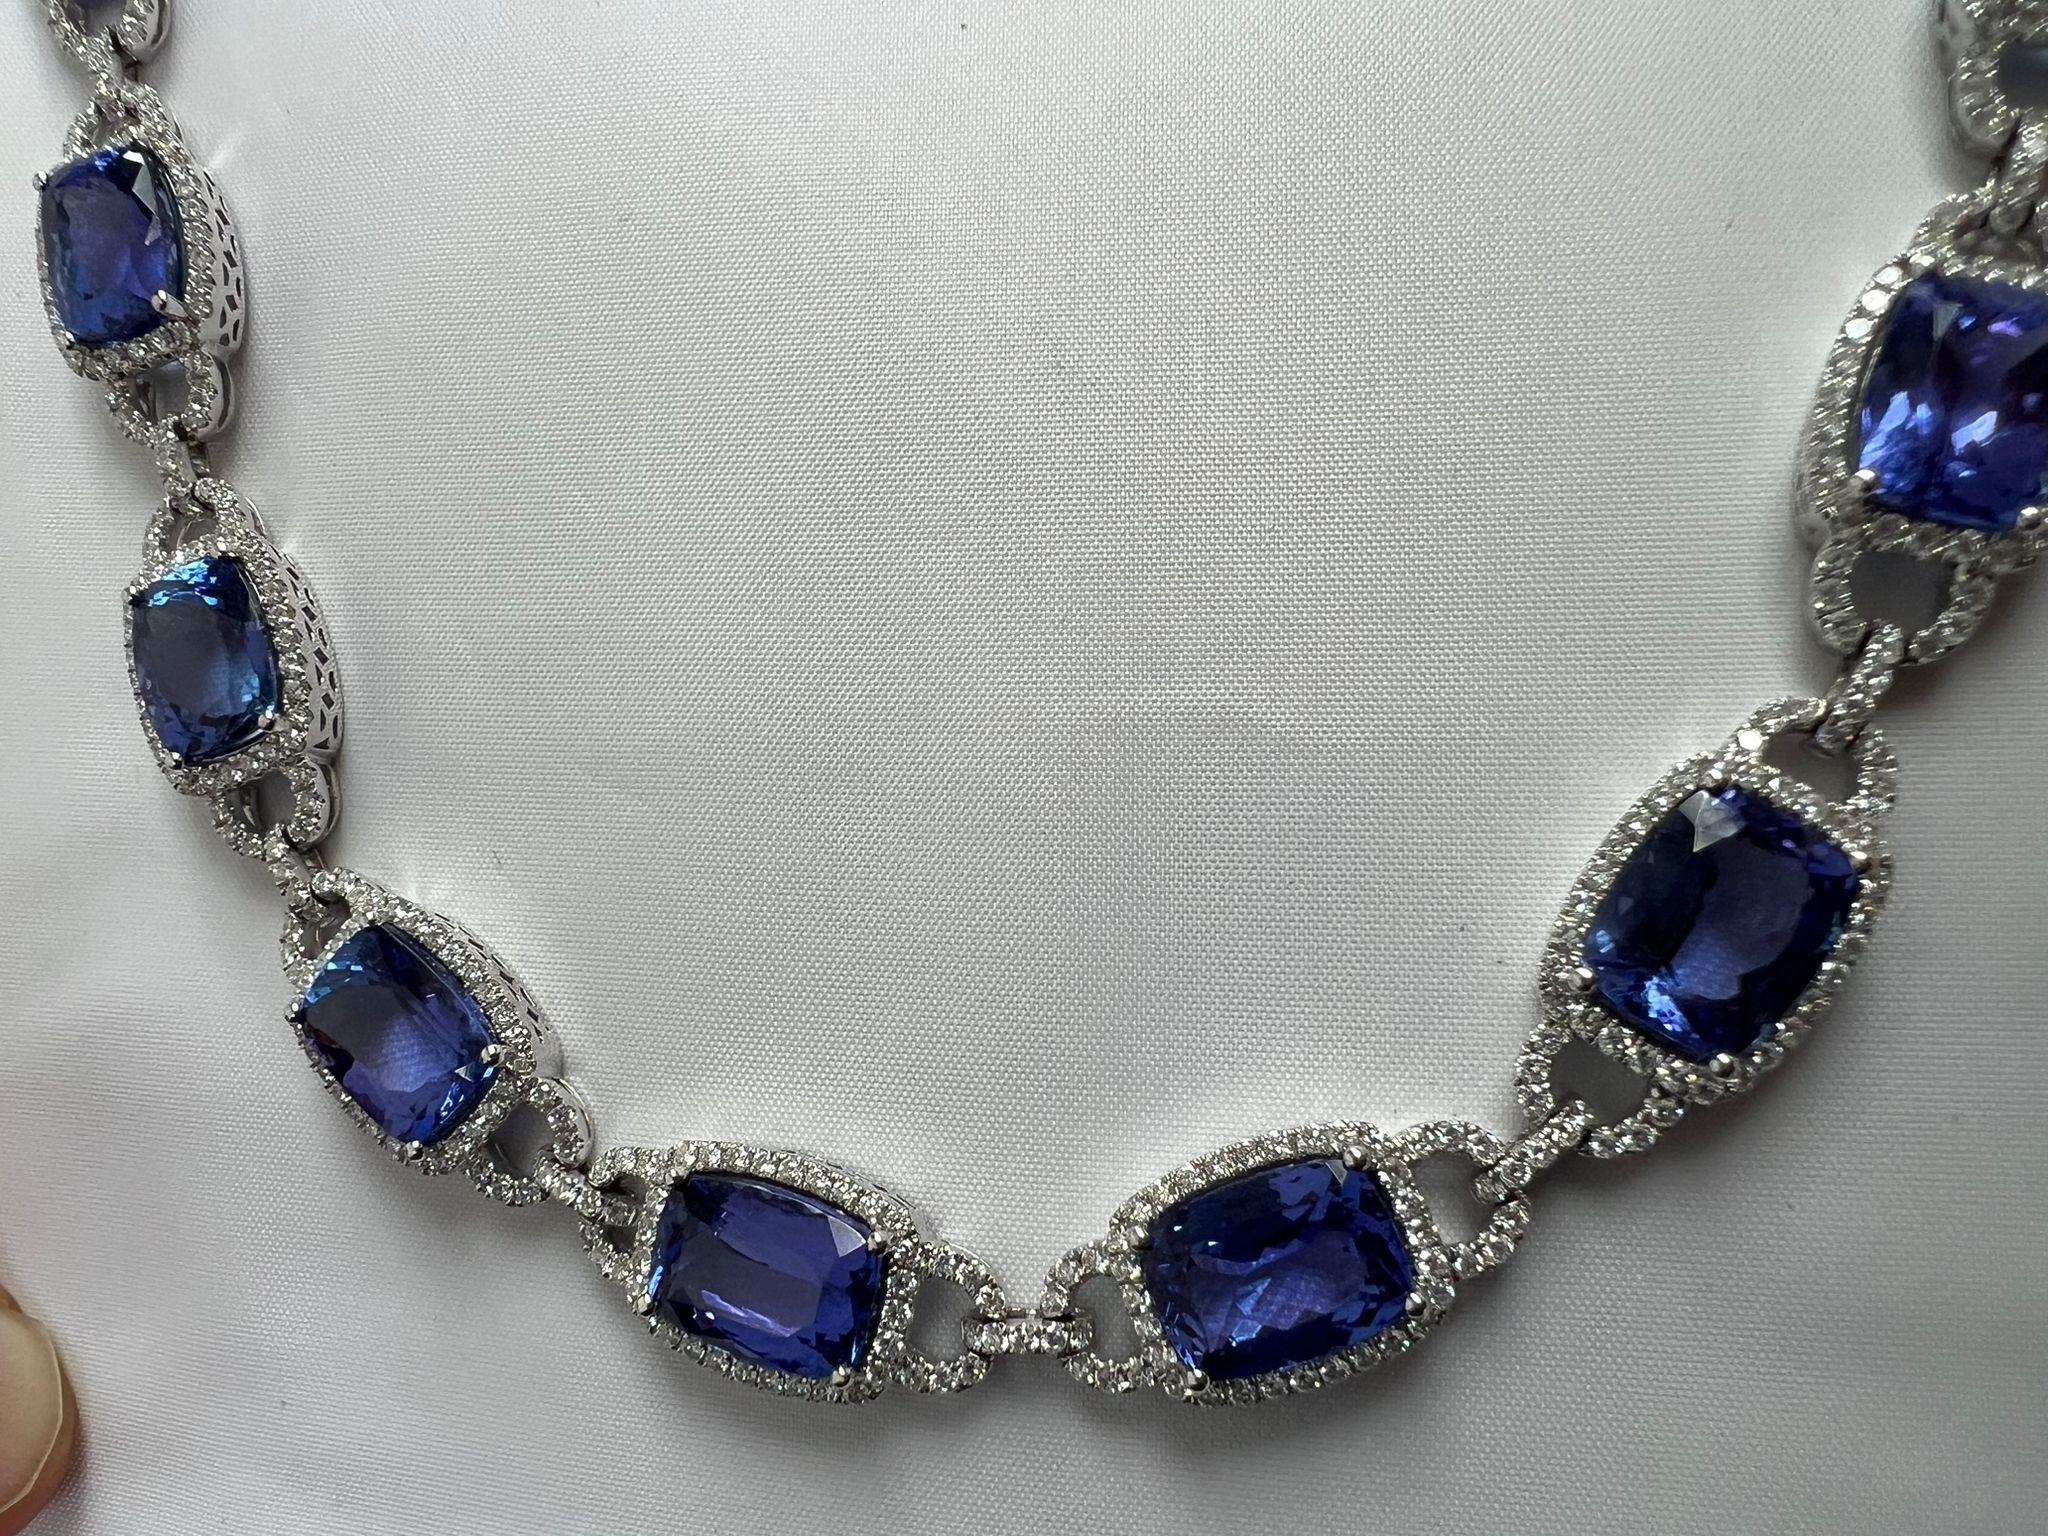 Exquisite 14 Karat White Gold Cushion Tanzanite Necklace - Vivid AAA Quality For Sale 7